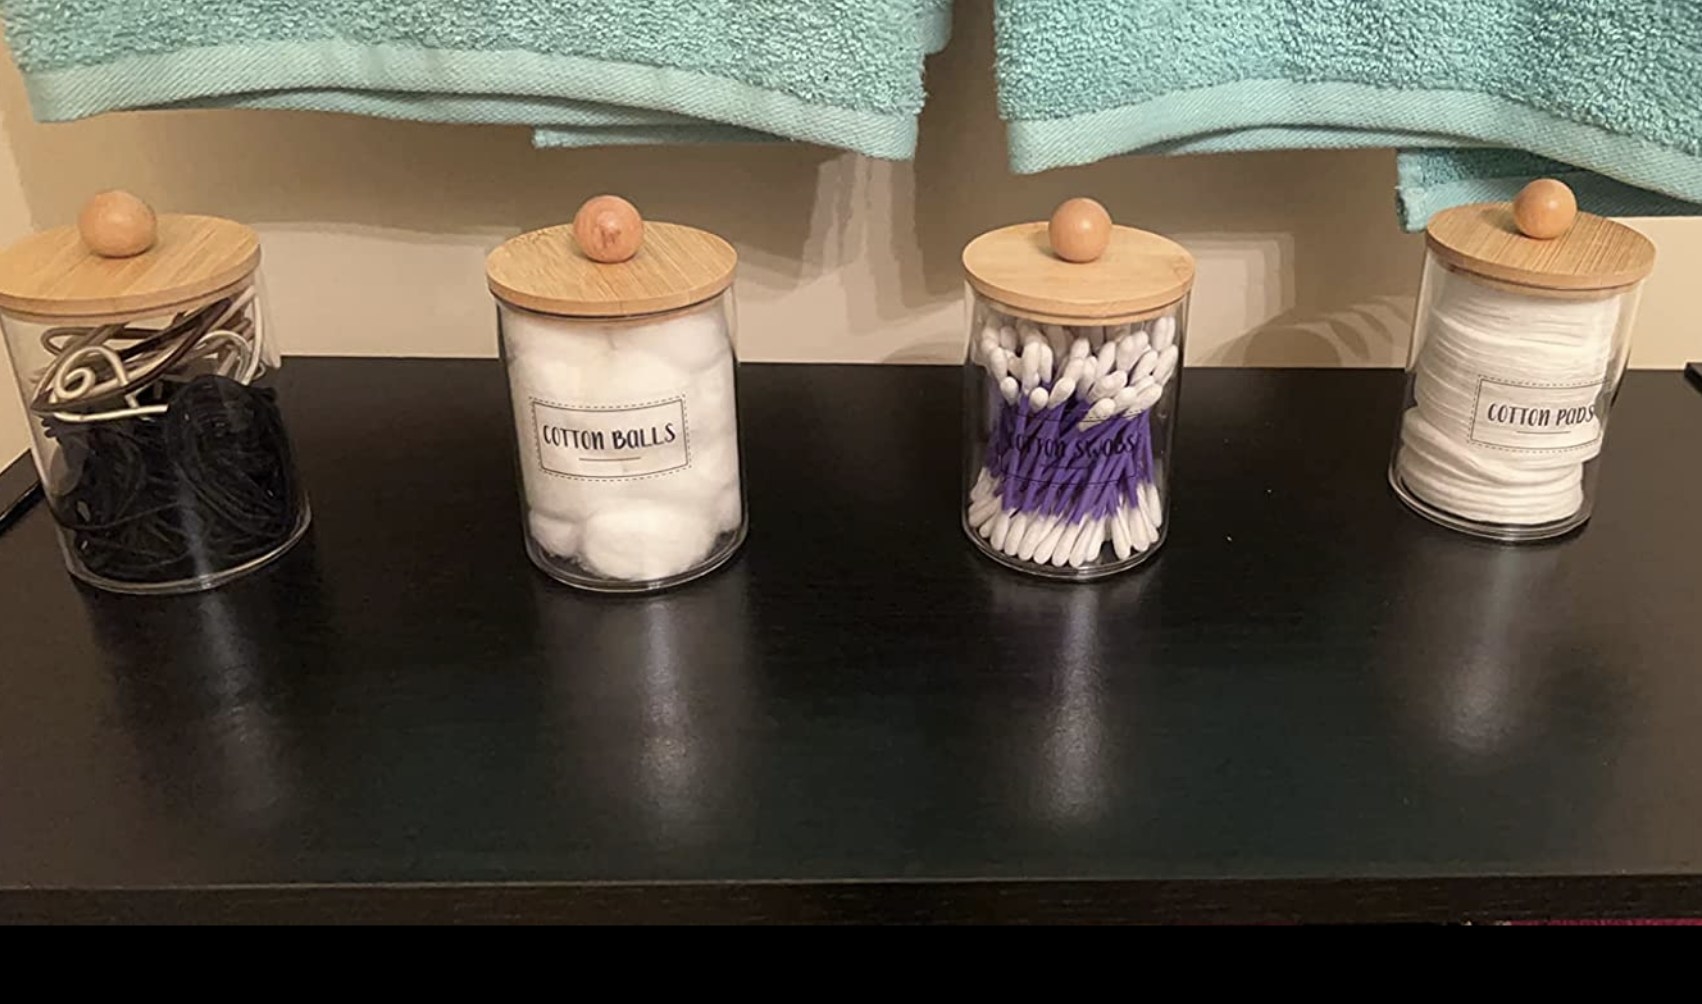 reviewer photo showing the bathroom organizer jars filled with q-tips, cotton rounds, and more